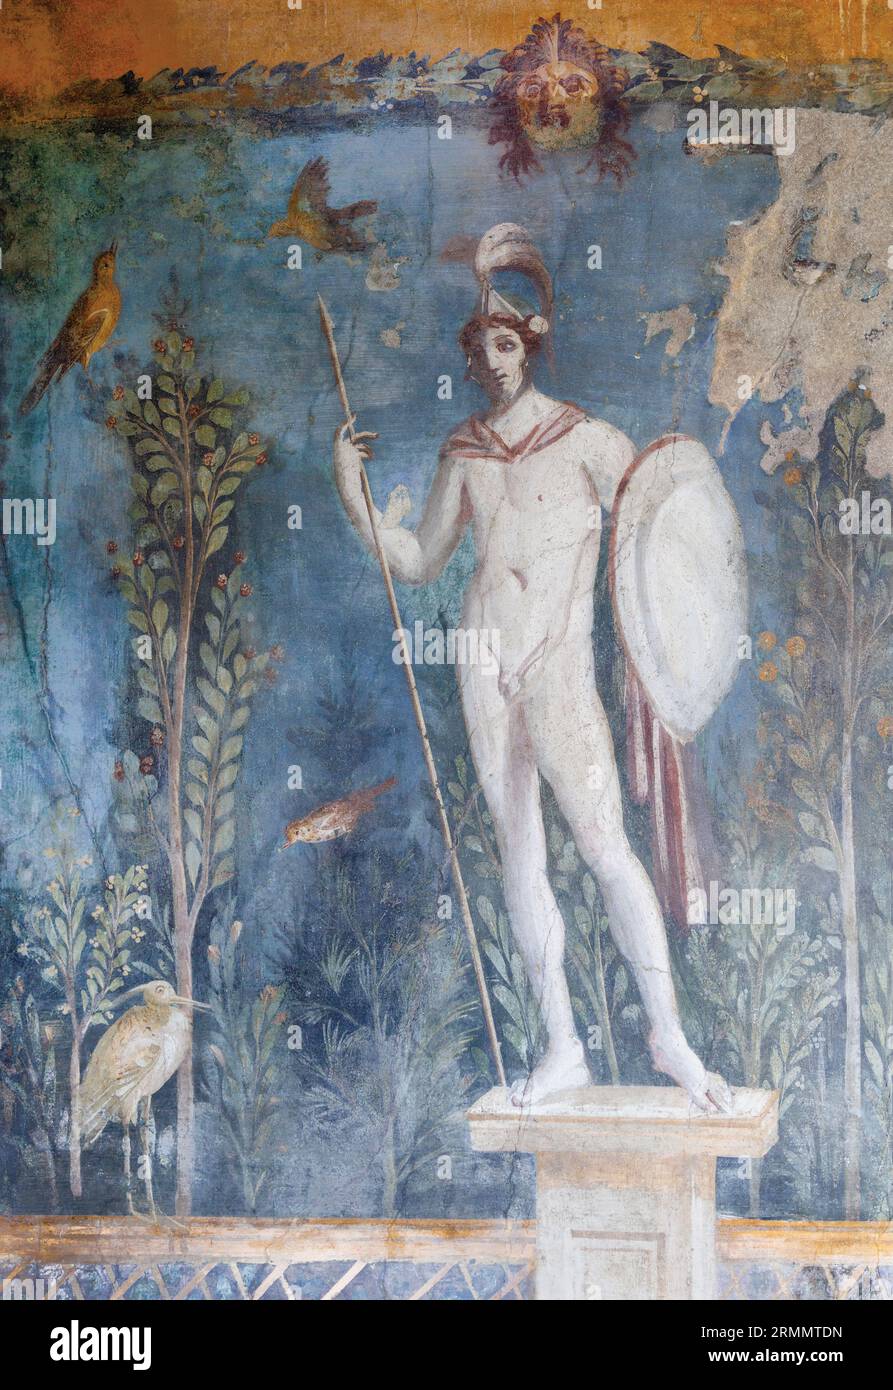 Pompeii Archaeological Site, Campania, Italy.  Fresco of Mars surrounded by birds in a garden setting.  House of Venus in a Seashell.  Casa della Vene Stock Photo